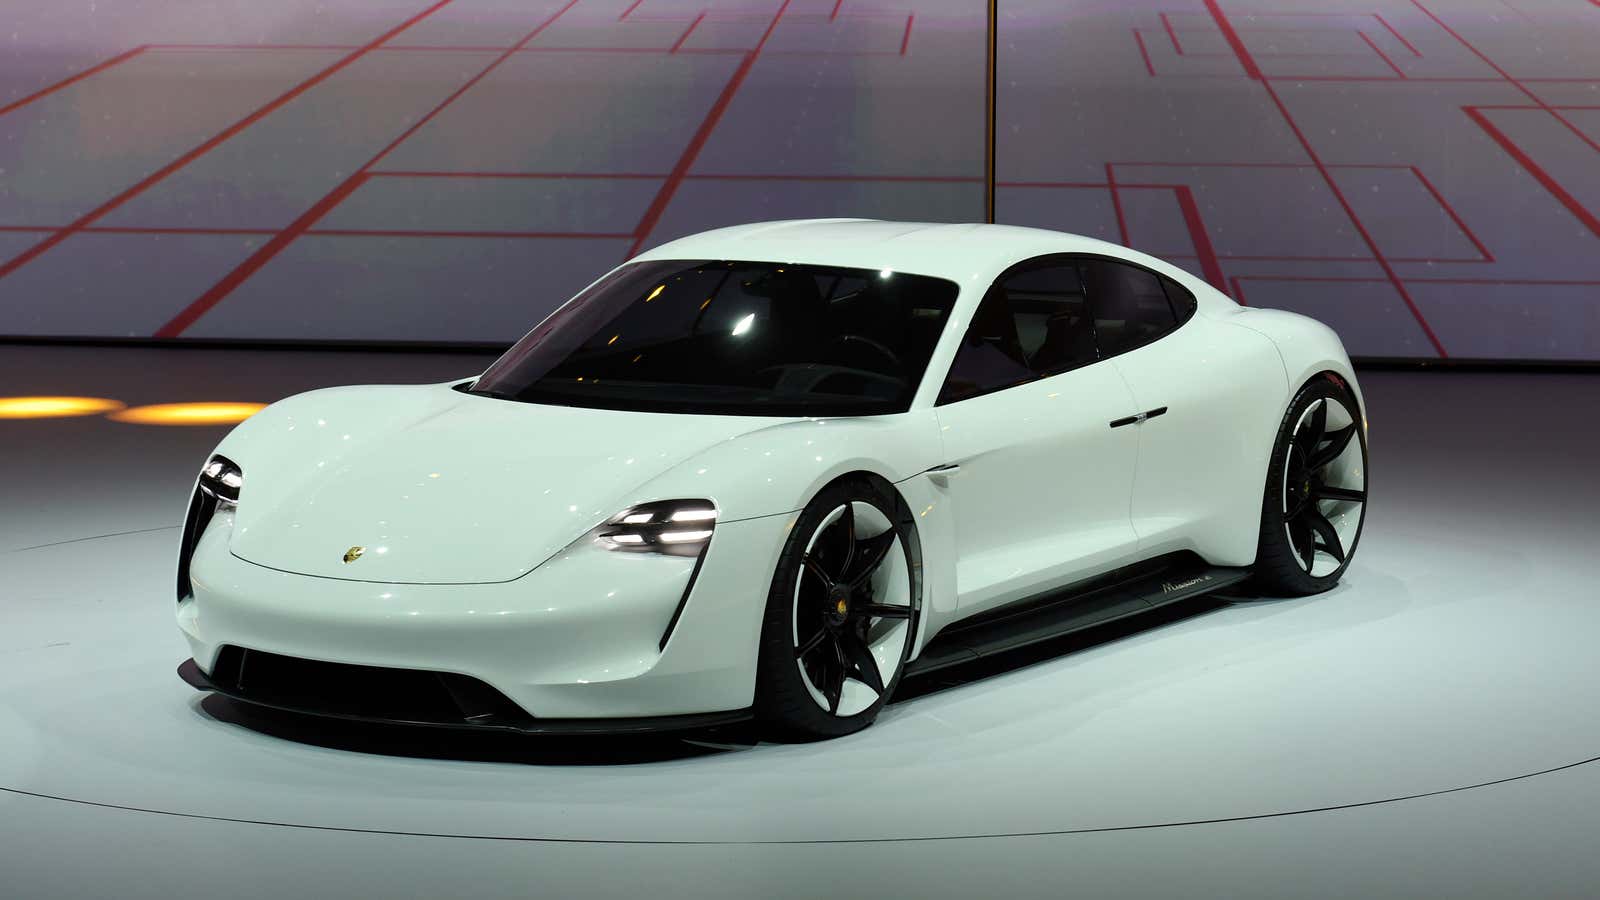 The Mission E concept was first presented in 2015.